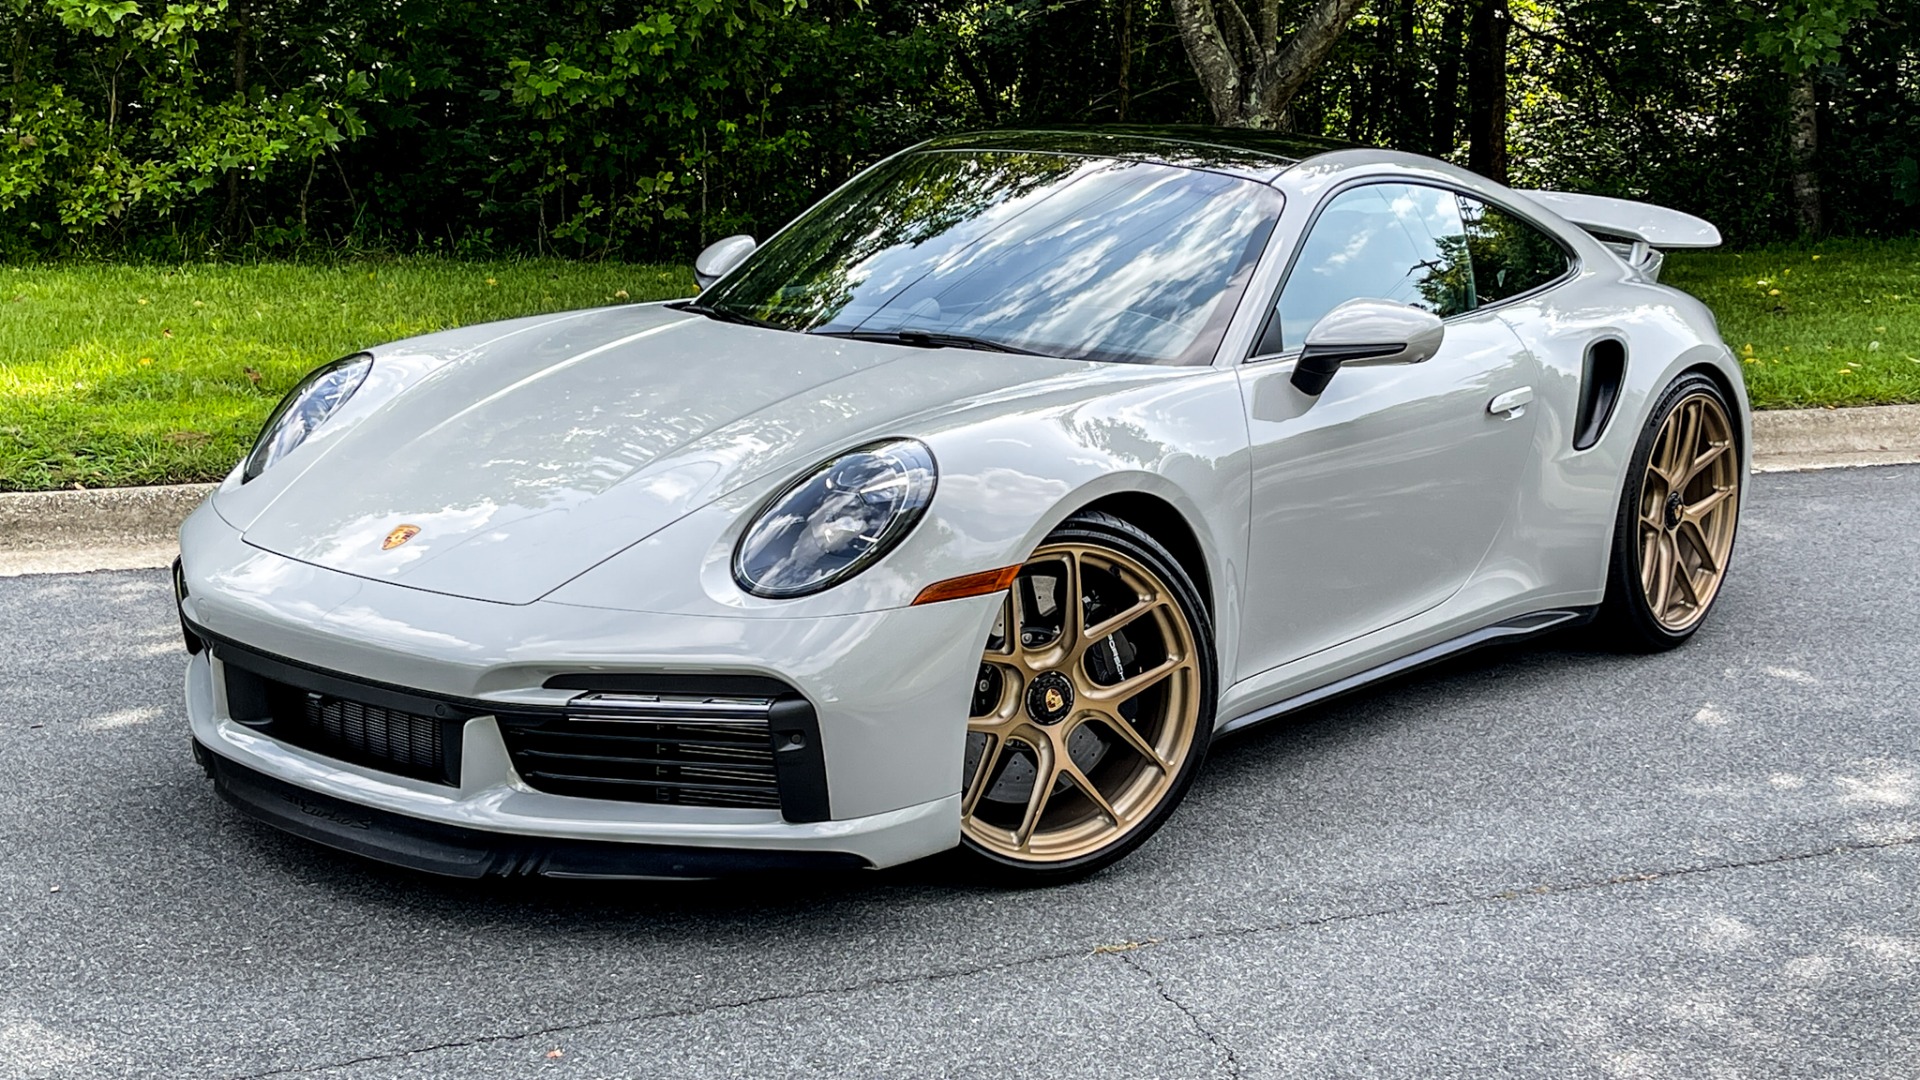 Used 2021 Porsche 911 Turbo S / HRE WHEELS / FRONT LIFT / MATRIX LIGHTS / PASM SUSPENSION for sale $279,000 at Formula Imports in Charlotte NC 28227 2